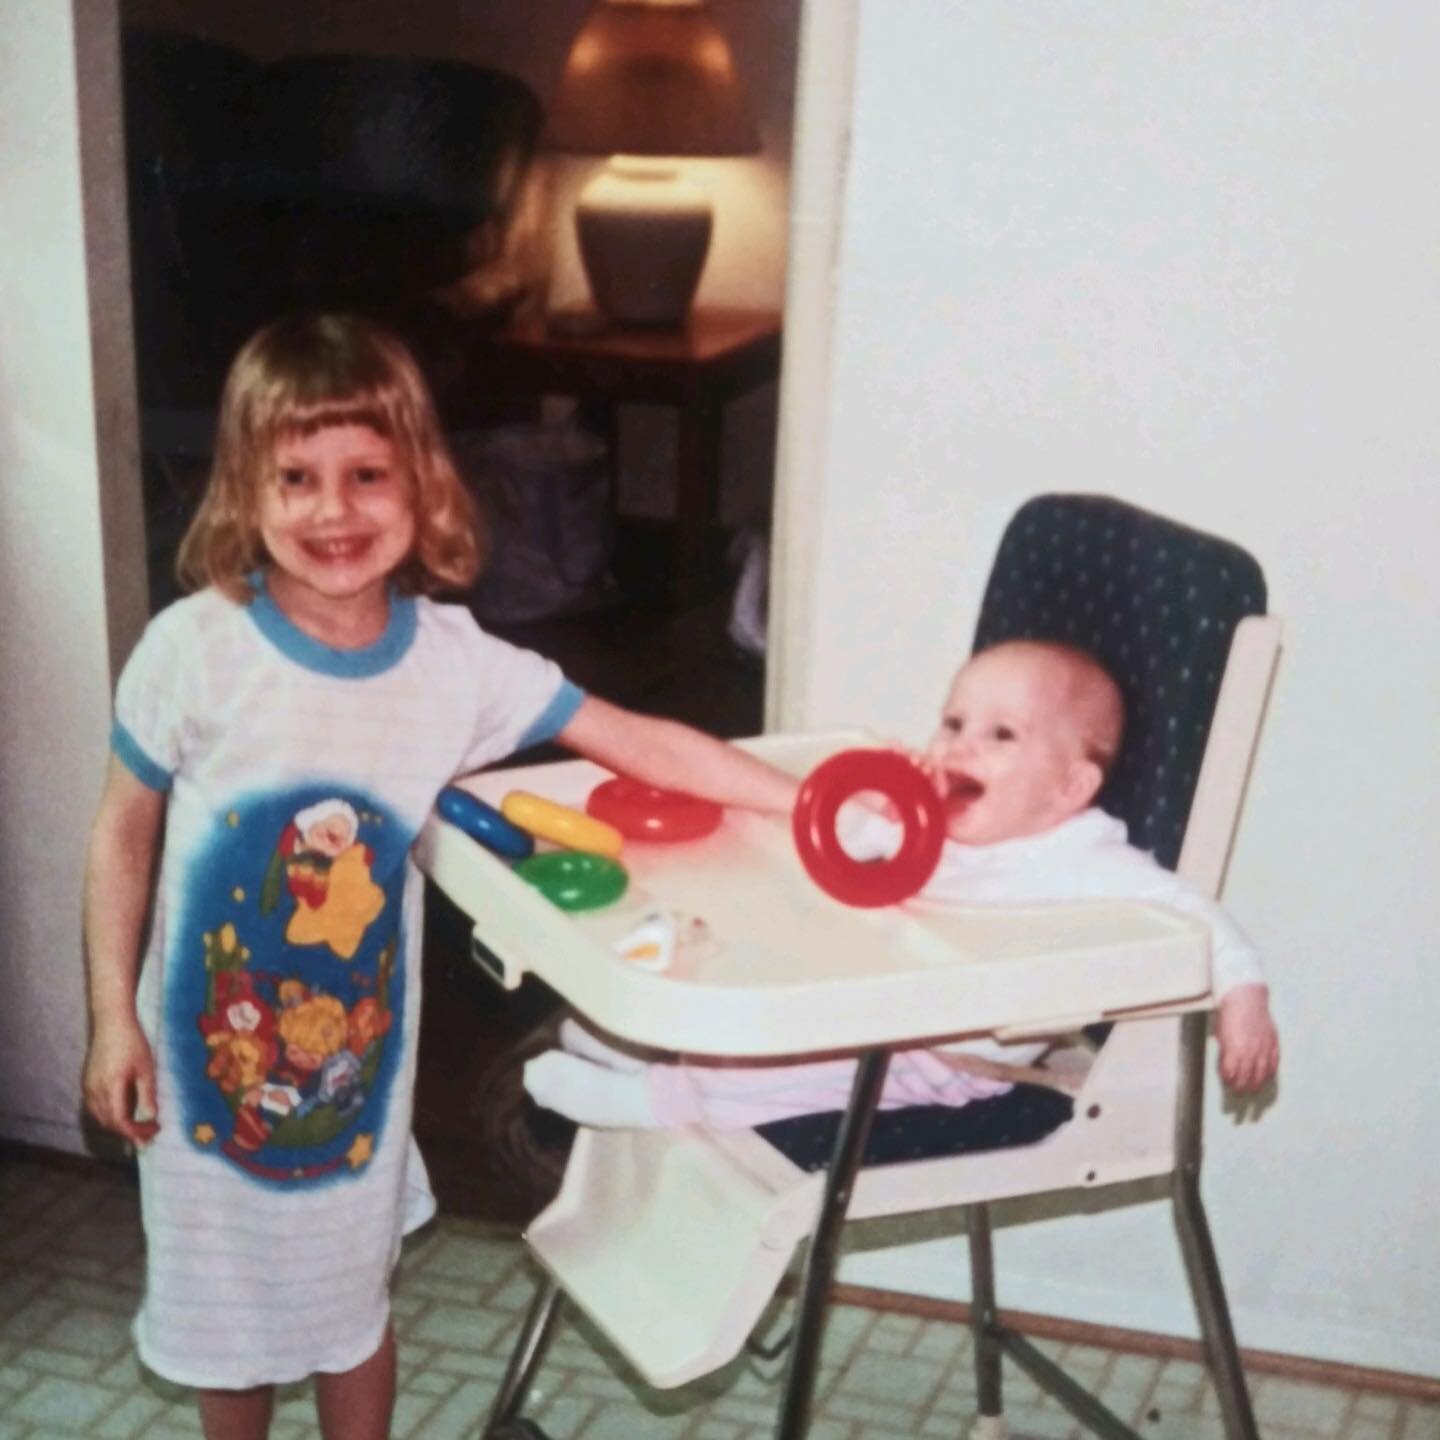 Me and my sister @basic_stephanie end of 1989 maybe. I am sporting a very fashionable Rainbow Brite nightgown and feeding her plastic. I am still into rainbows and not good with children👩🏻&zwj;🎤
.
.
.
#rainbowbrite #throwback #springfieldva #sibli